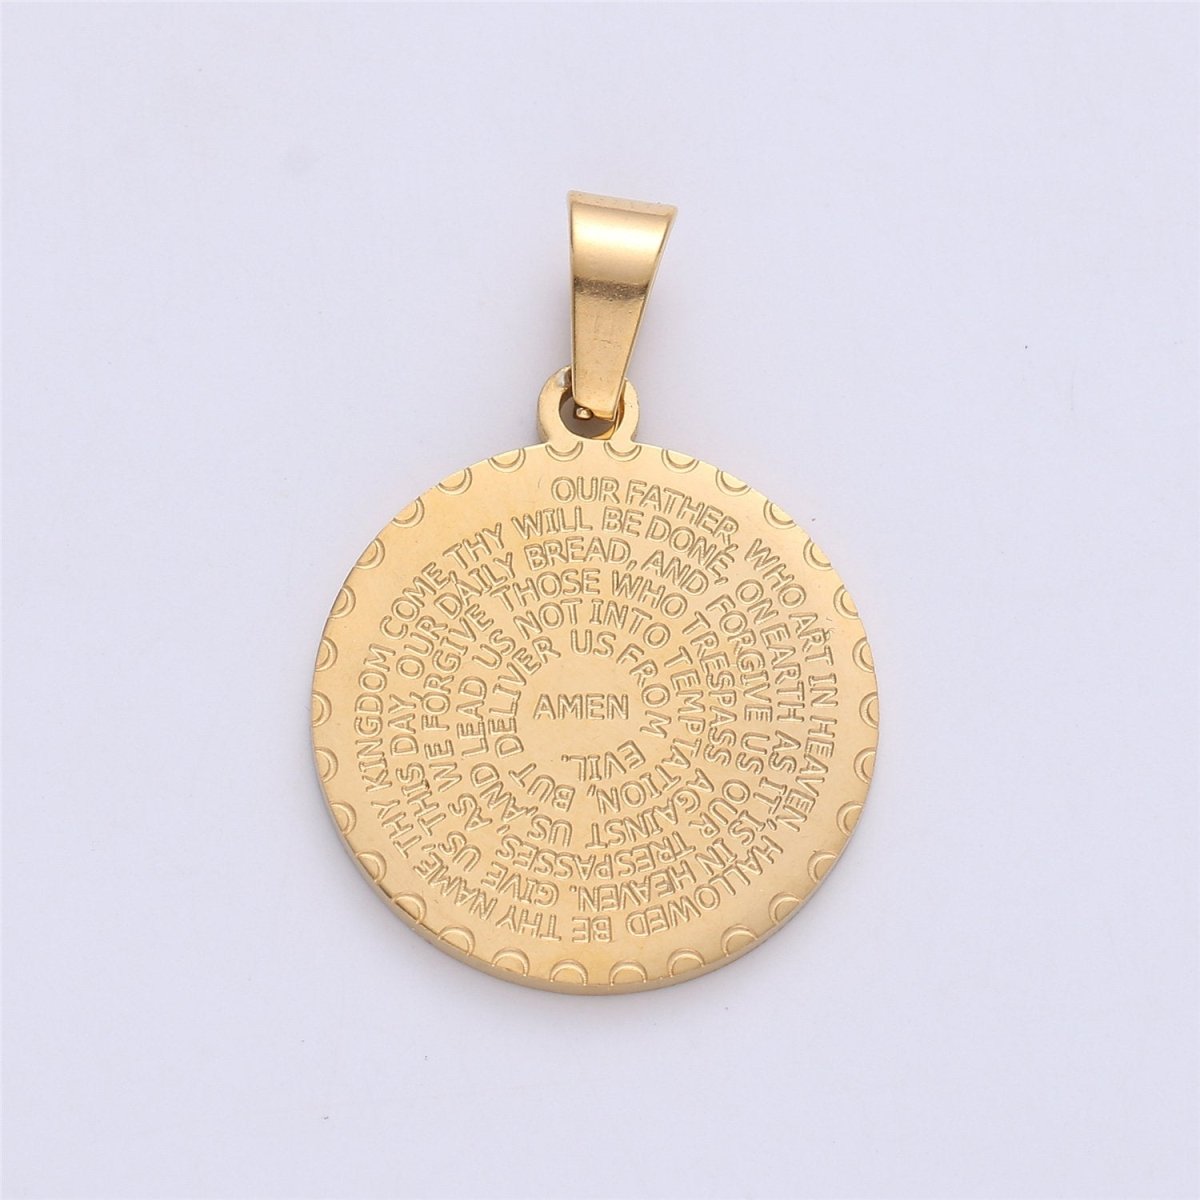 Dainty Gold Medallion Script Pendant Necklace, Father Prayer Pendant, Engraved Lords Prayer for Religious Jewelry Necklace Charm | J-768, J-769 - DLUXCA